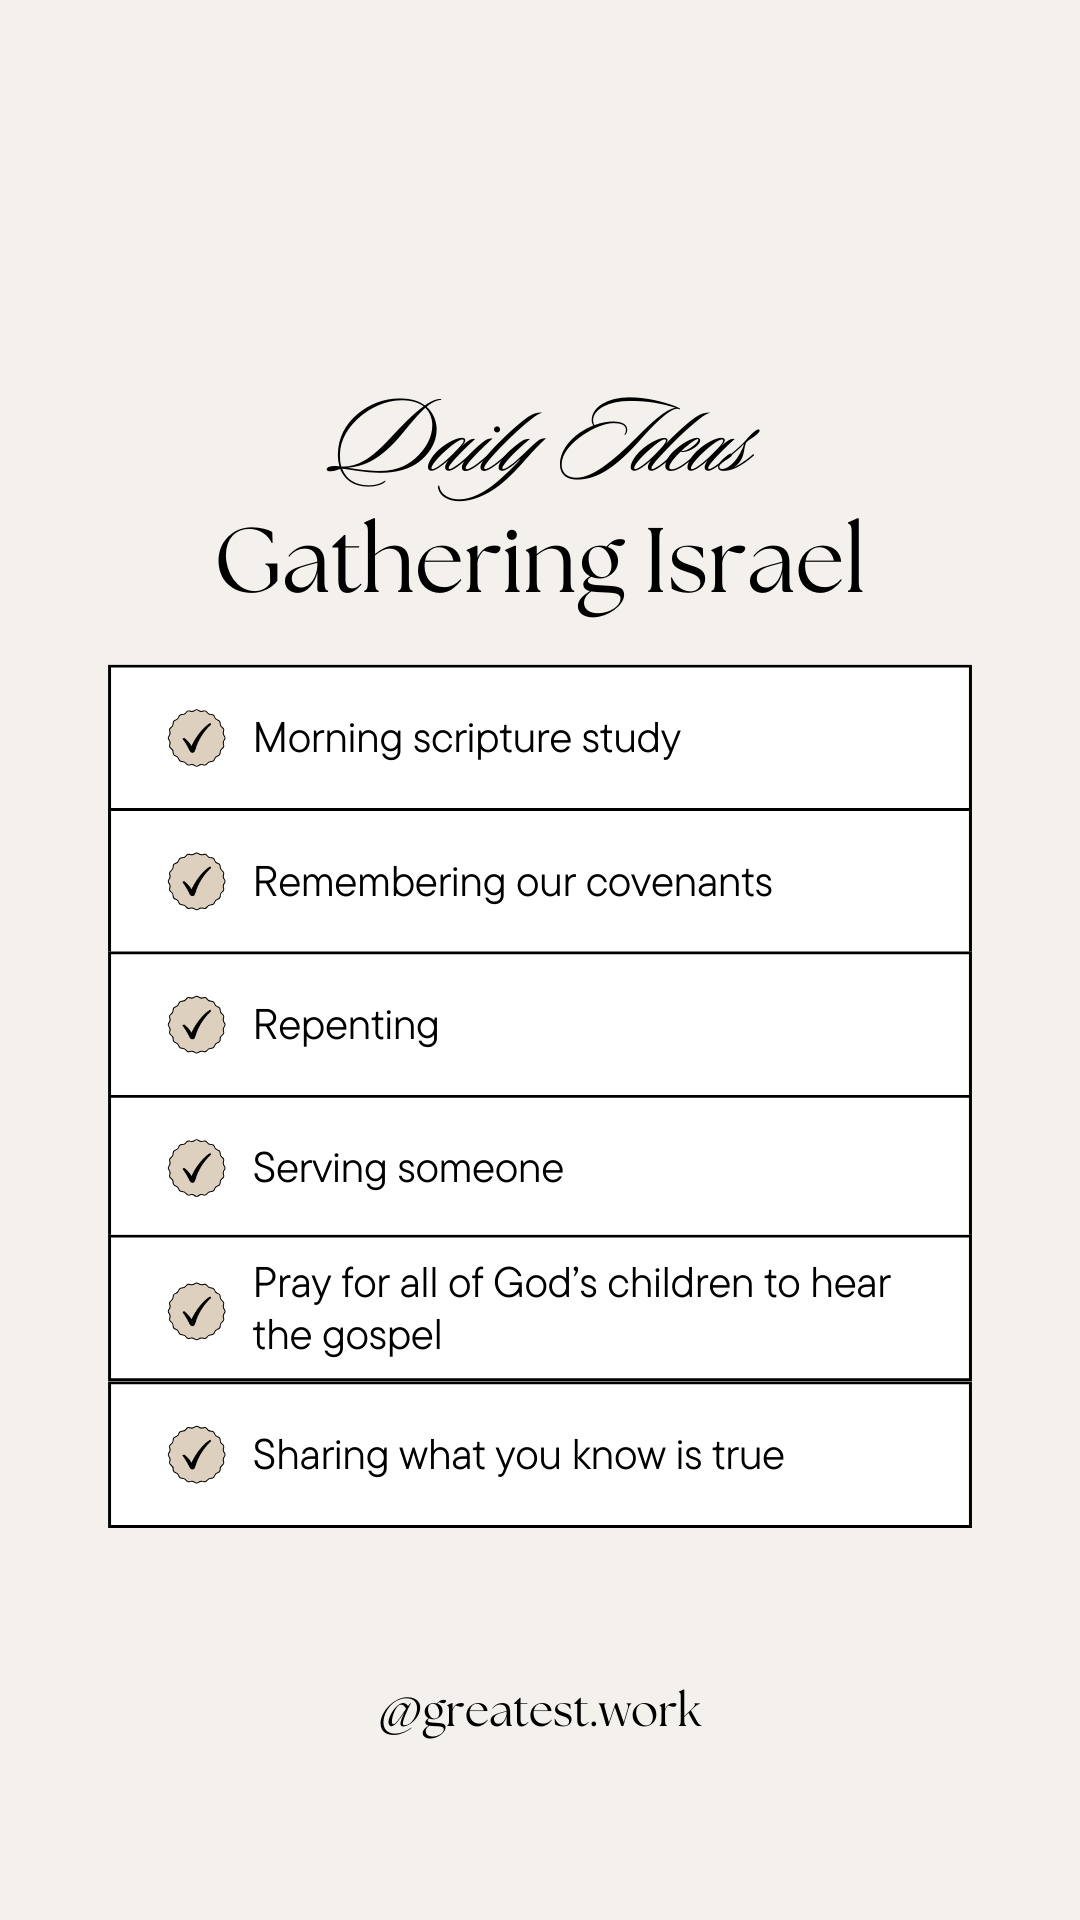 Daily Ideas for Gathering Israel